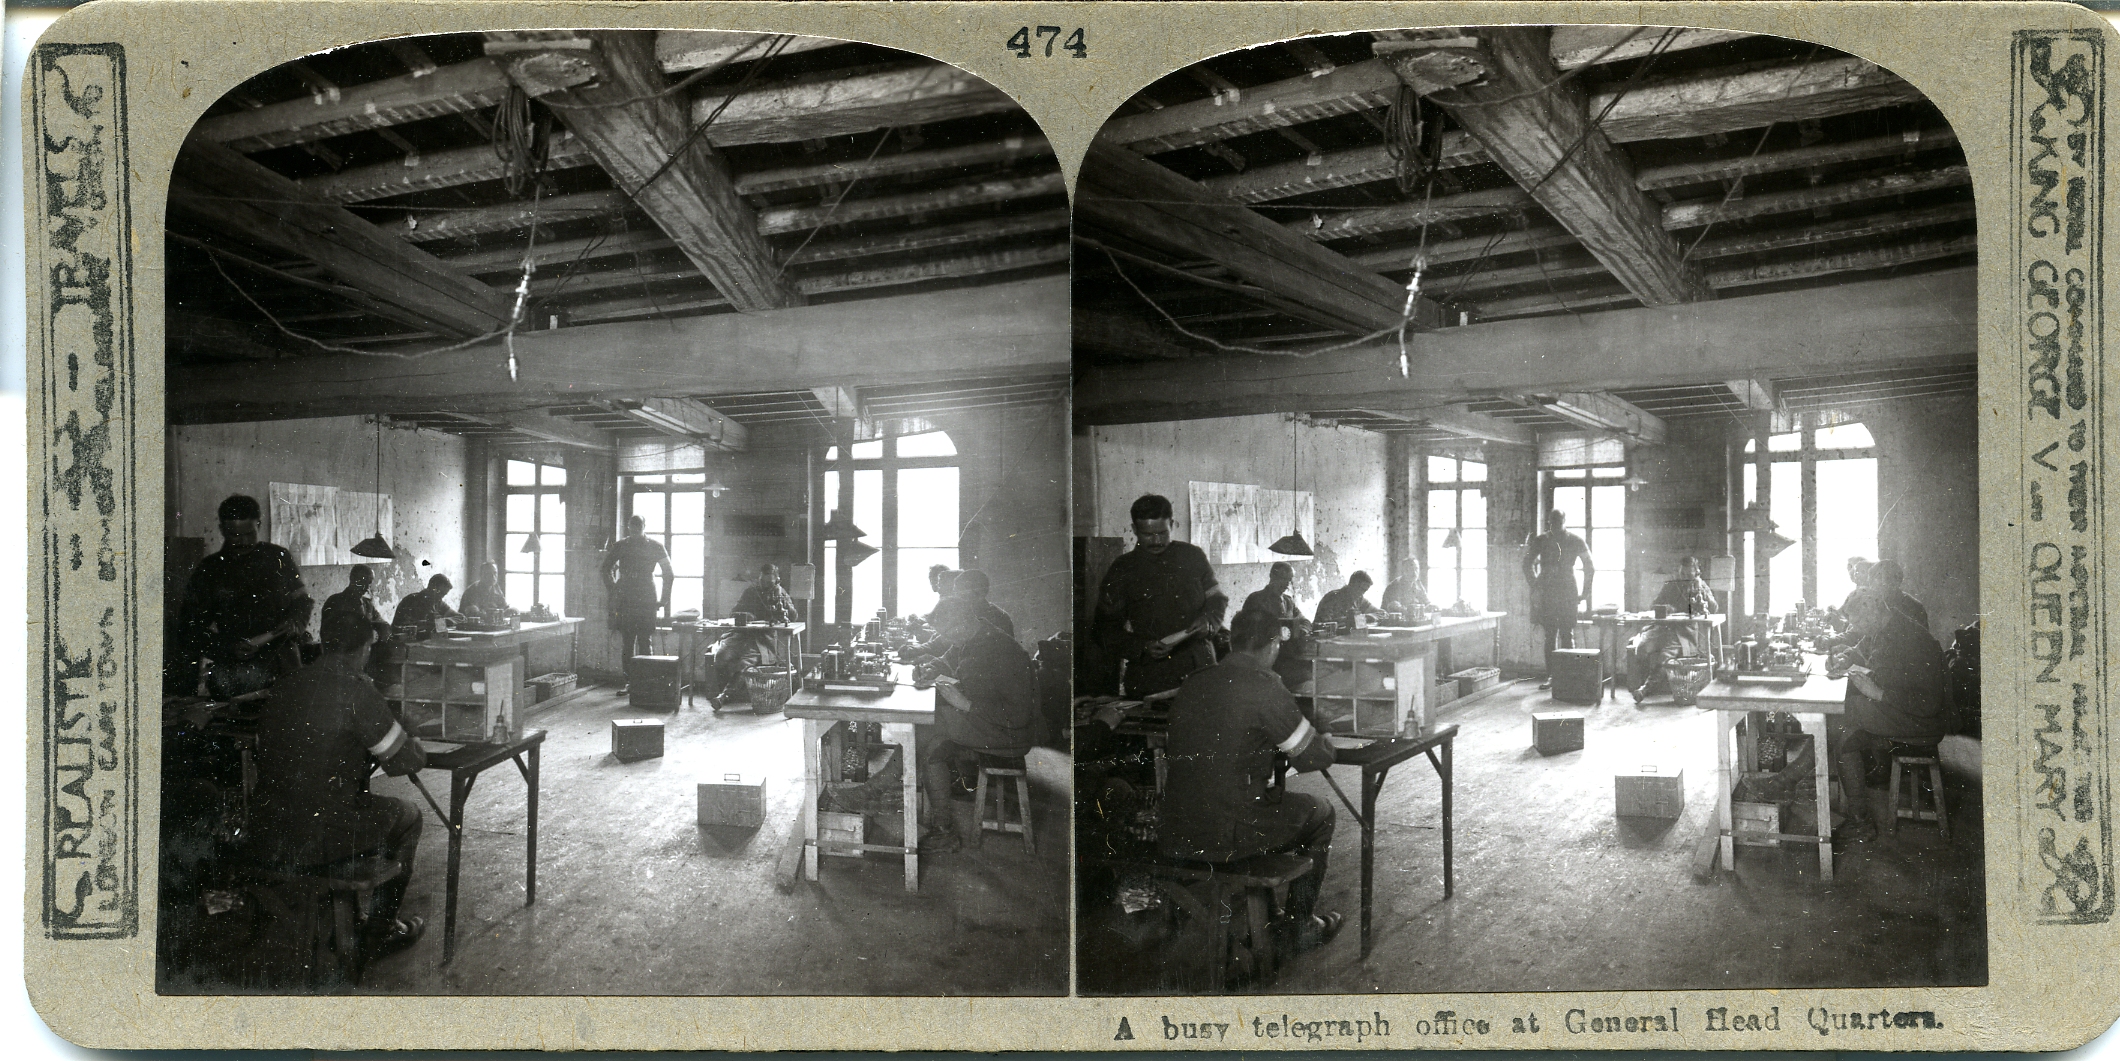 A busy telegraph office at General Head Quarters